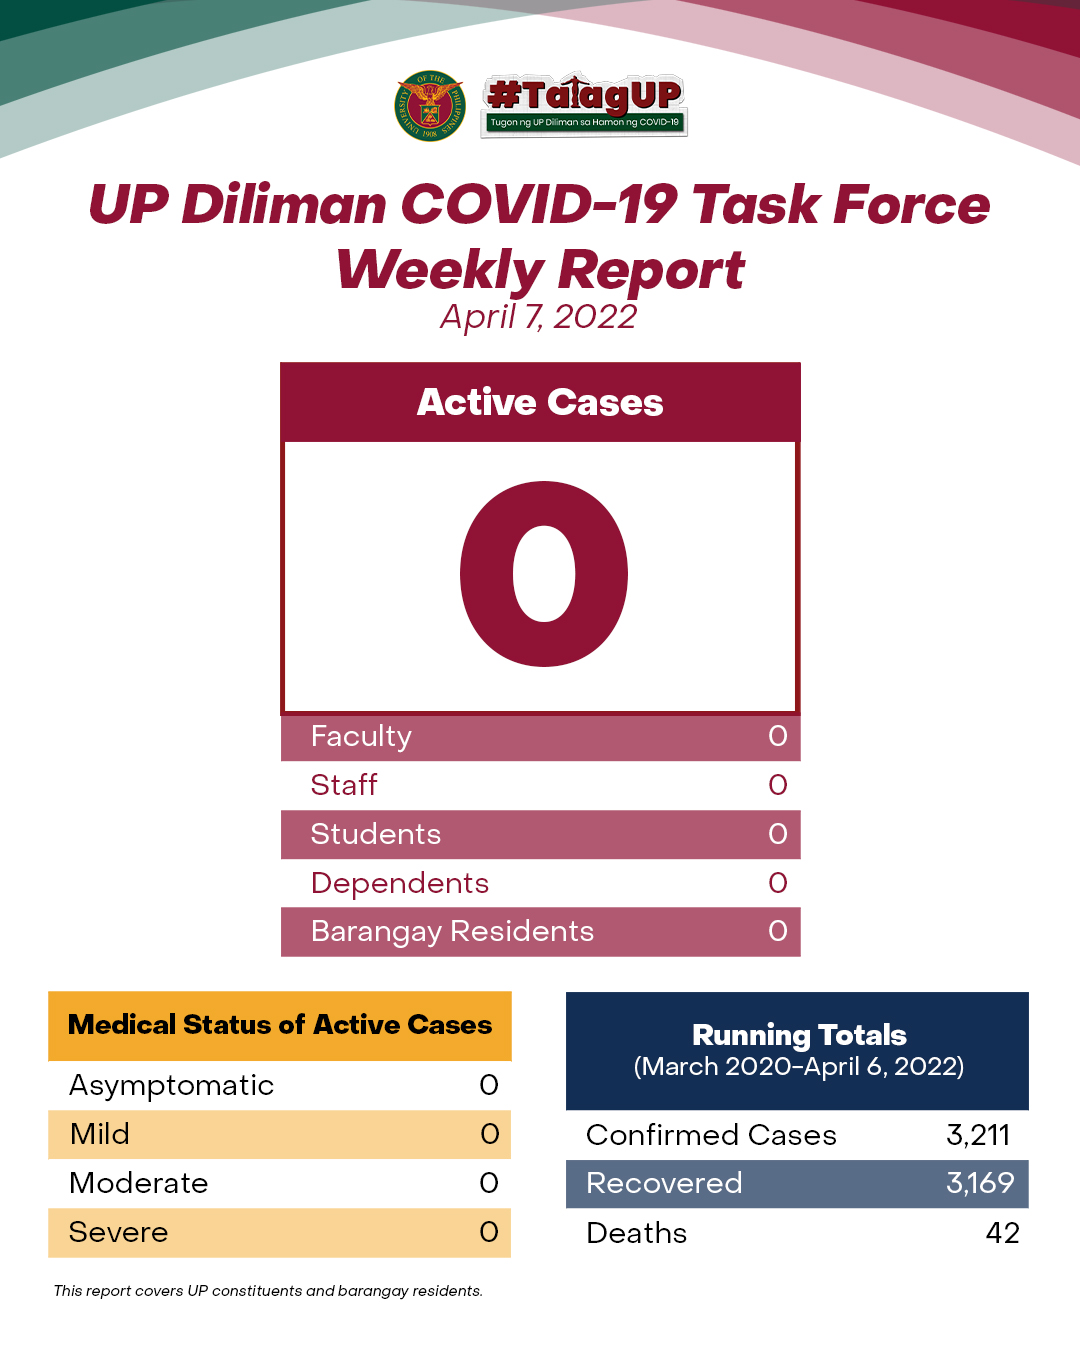 UP Diliman COVID-19 Task Force Weekly Report (April 7, 2022)